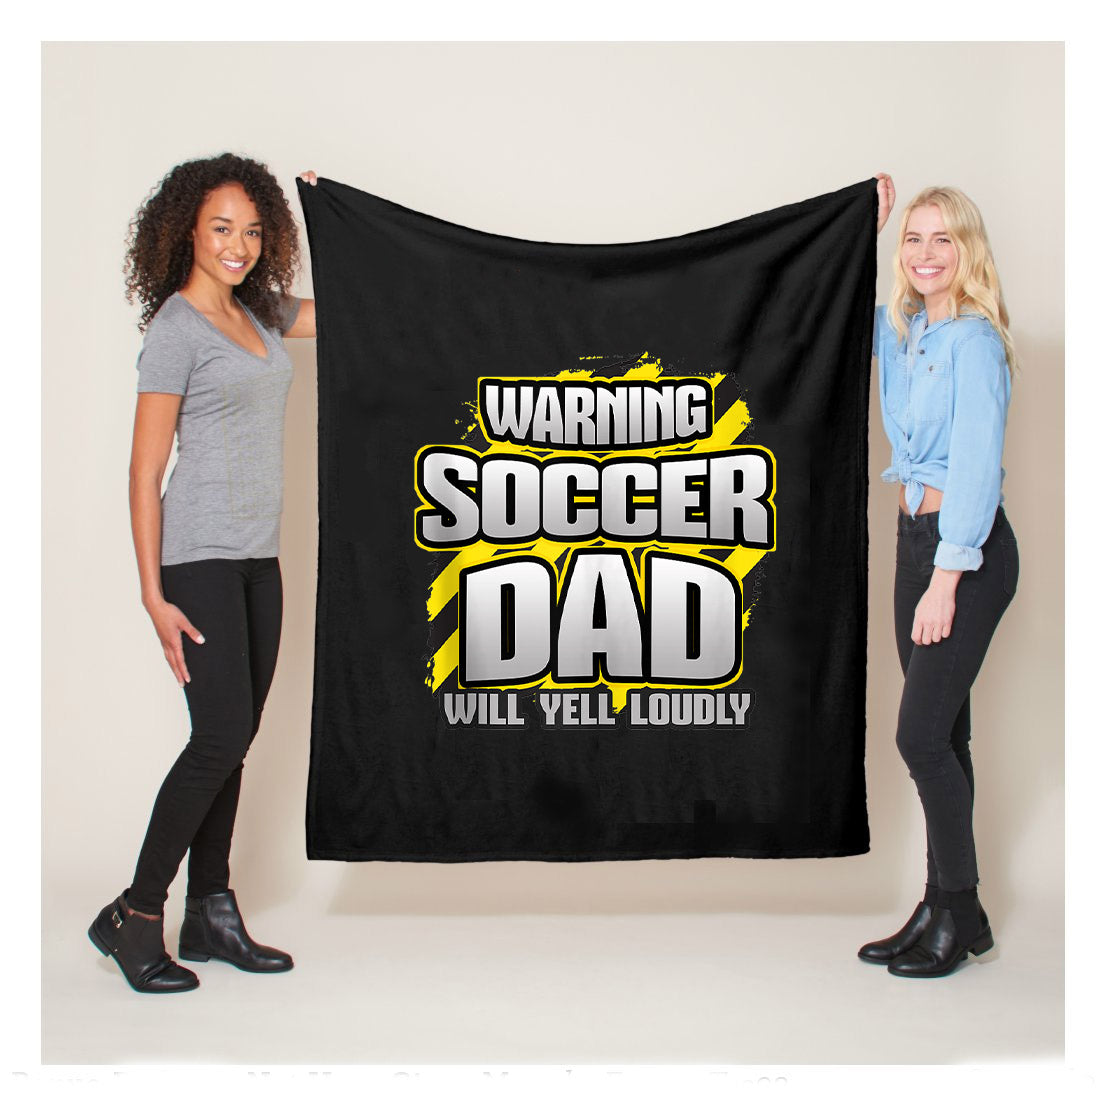 Funny Warning Soccer Dad Will Yell Loudly Fleece Blanket,  Soccer Blankets, Soccer Gifts, Happy Fathers Day Gift Ideas For Dad